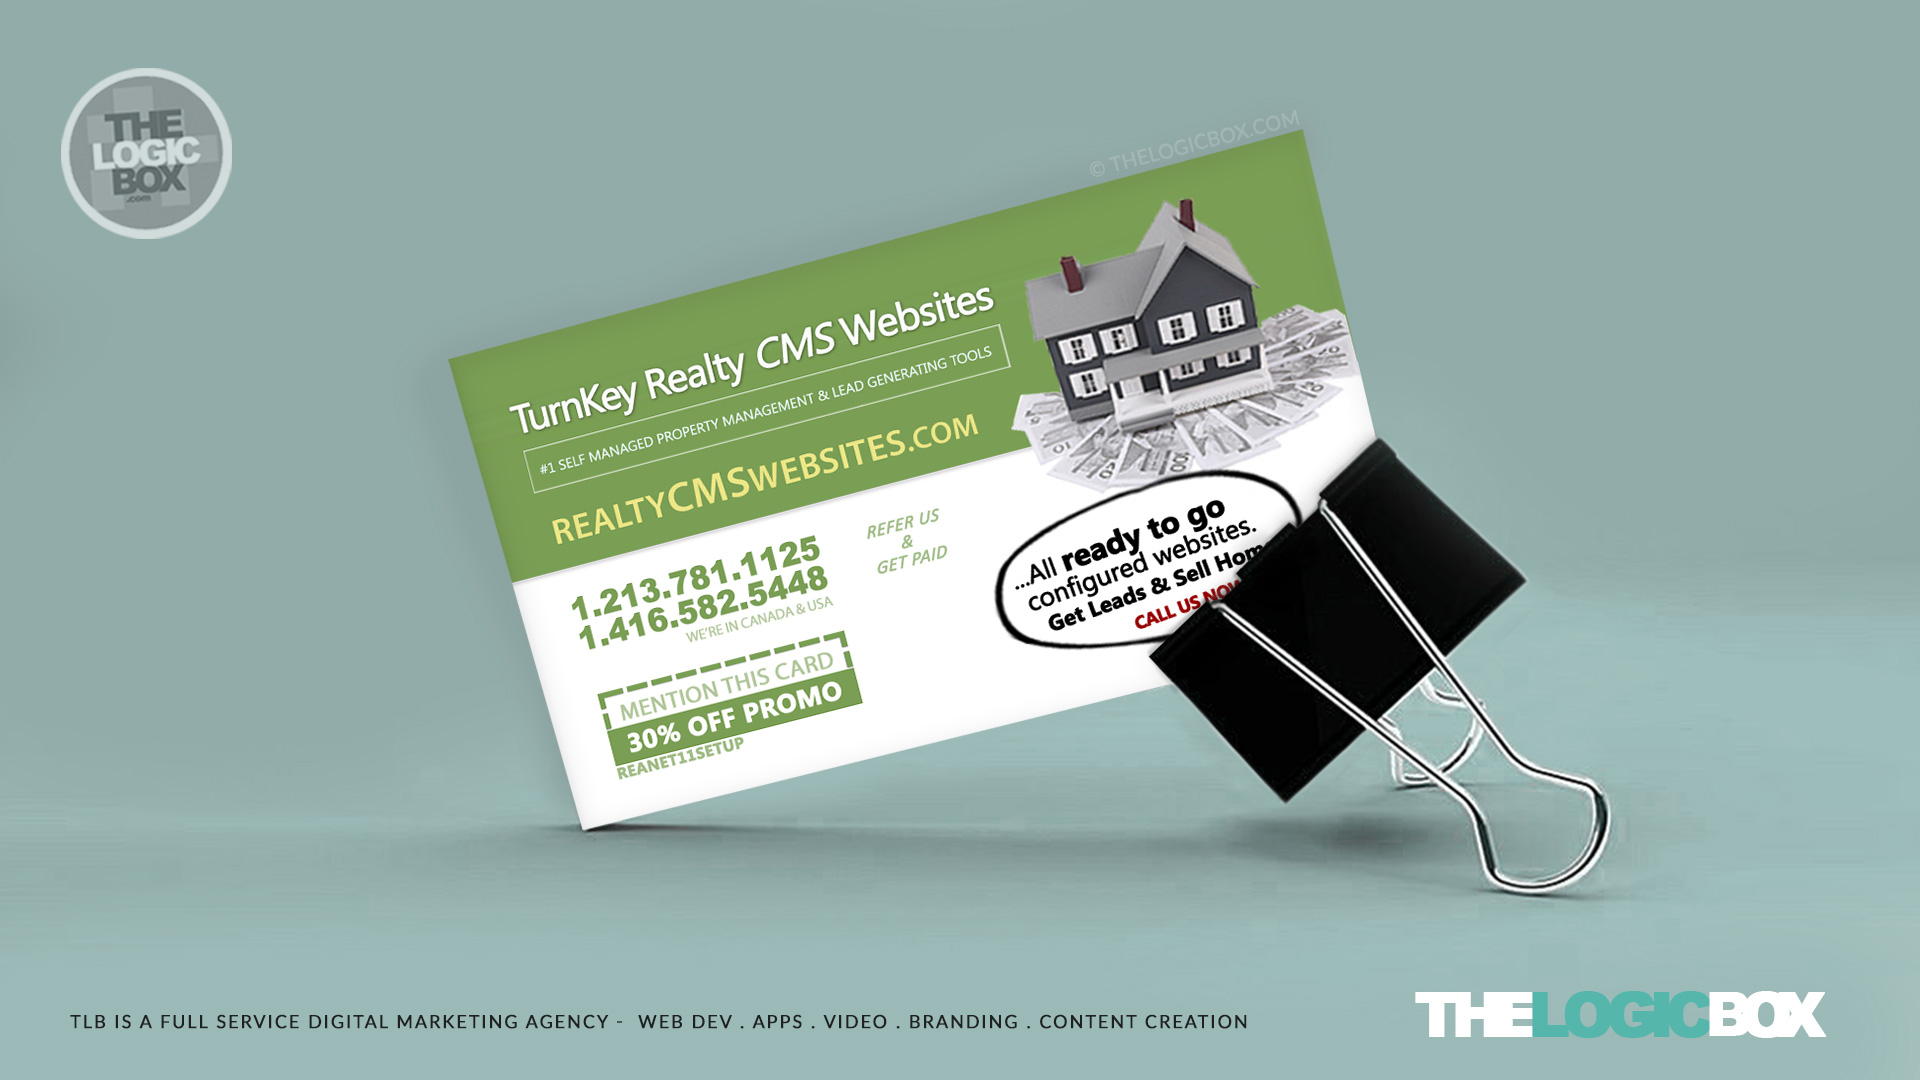 business-card-presentation-mockup-psd-1920x1080-thelogicbox-realtycmswebsites